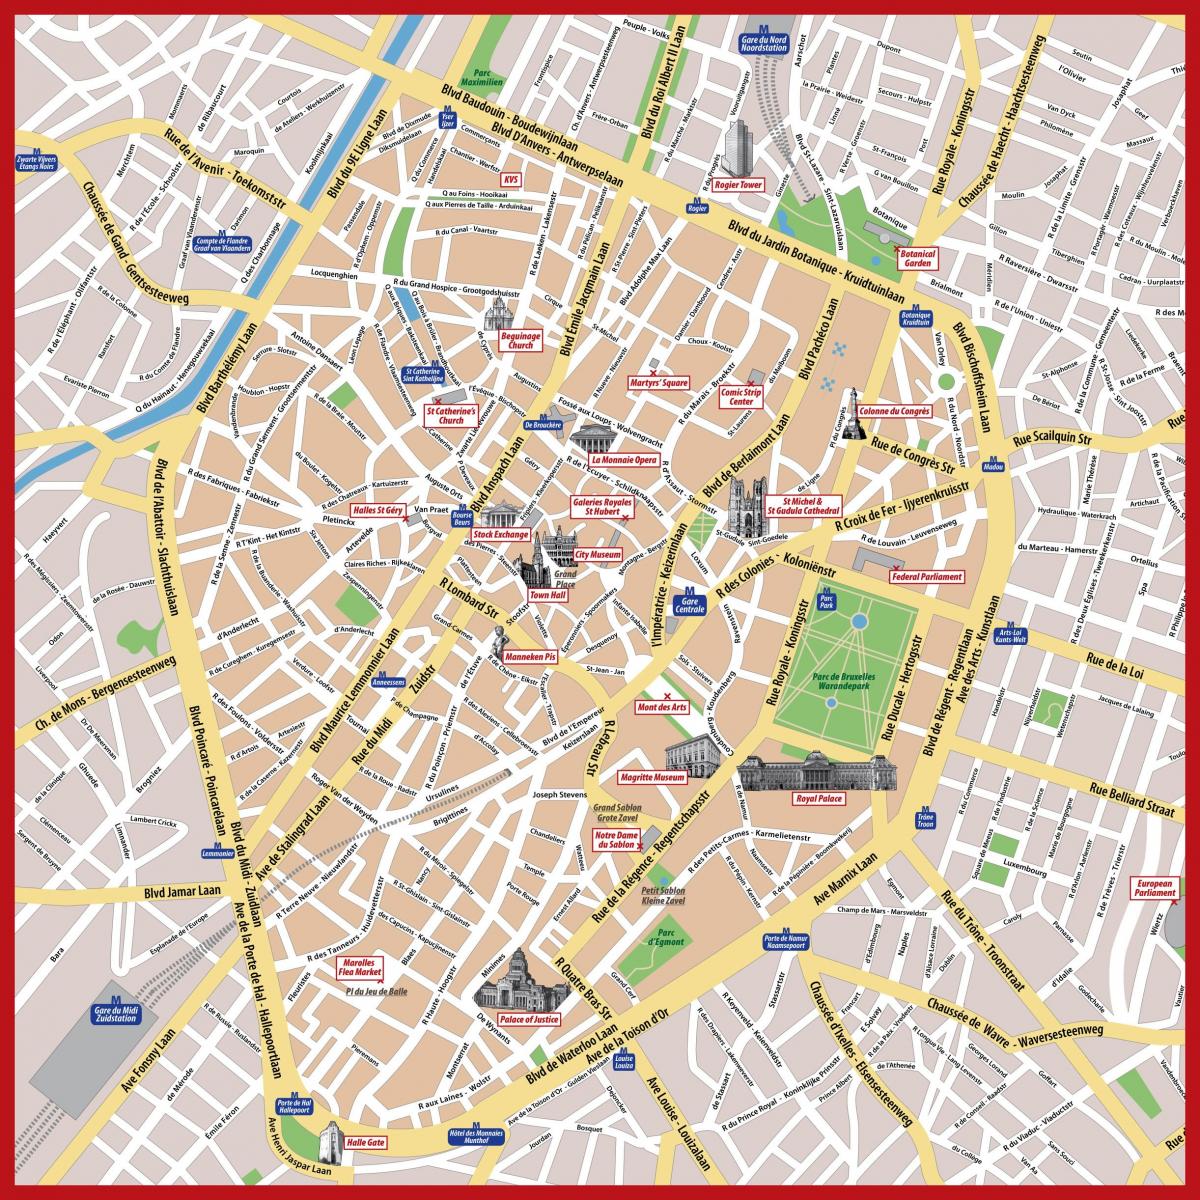 Bruxelles museo mappa